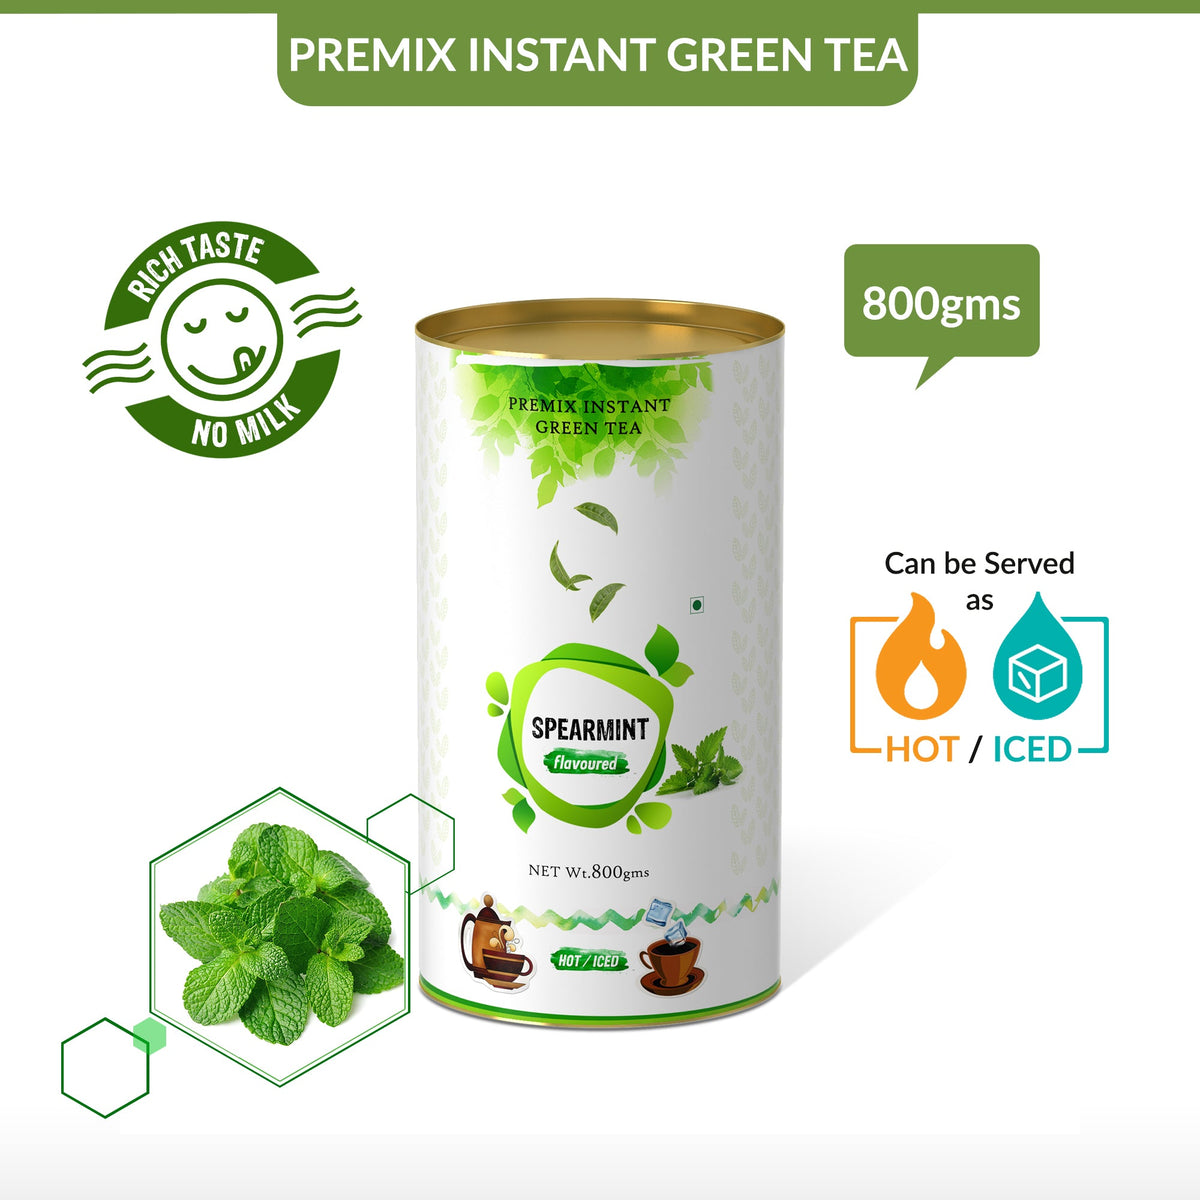 Spearmint Flavored Instant Green Tea